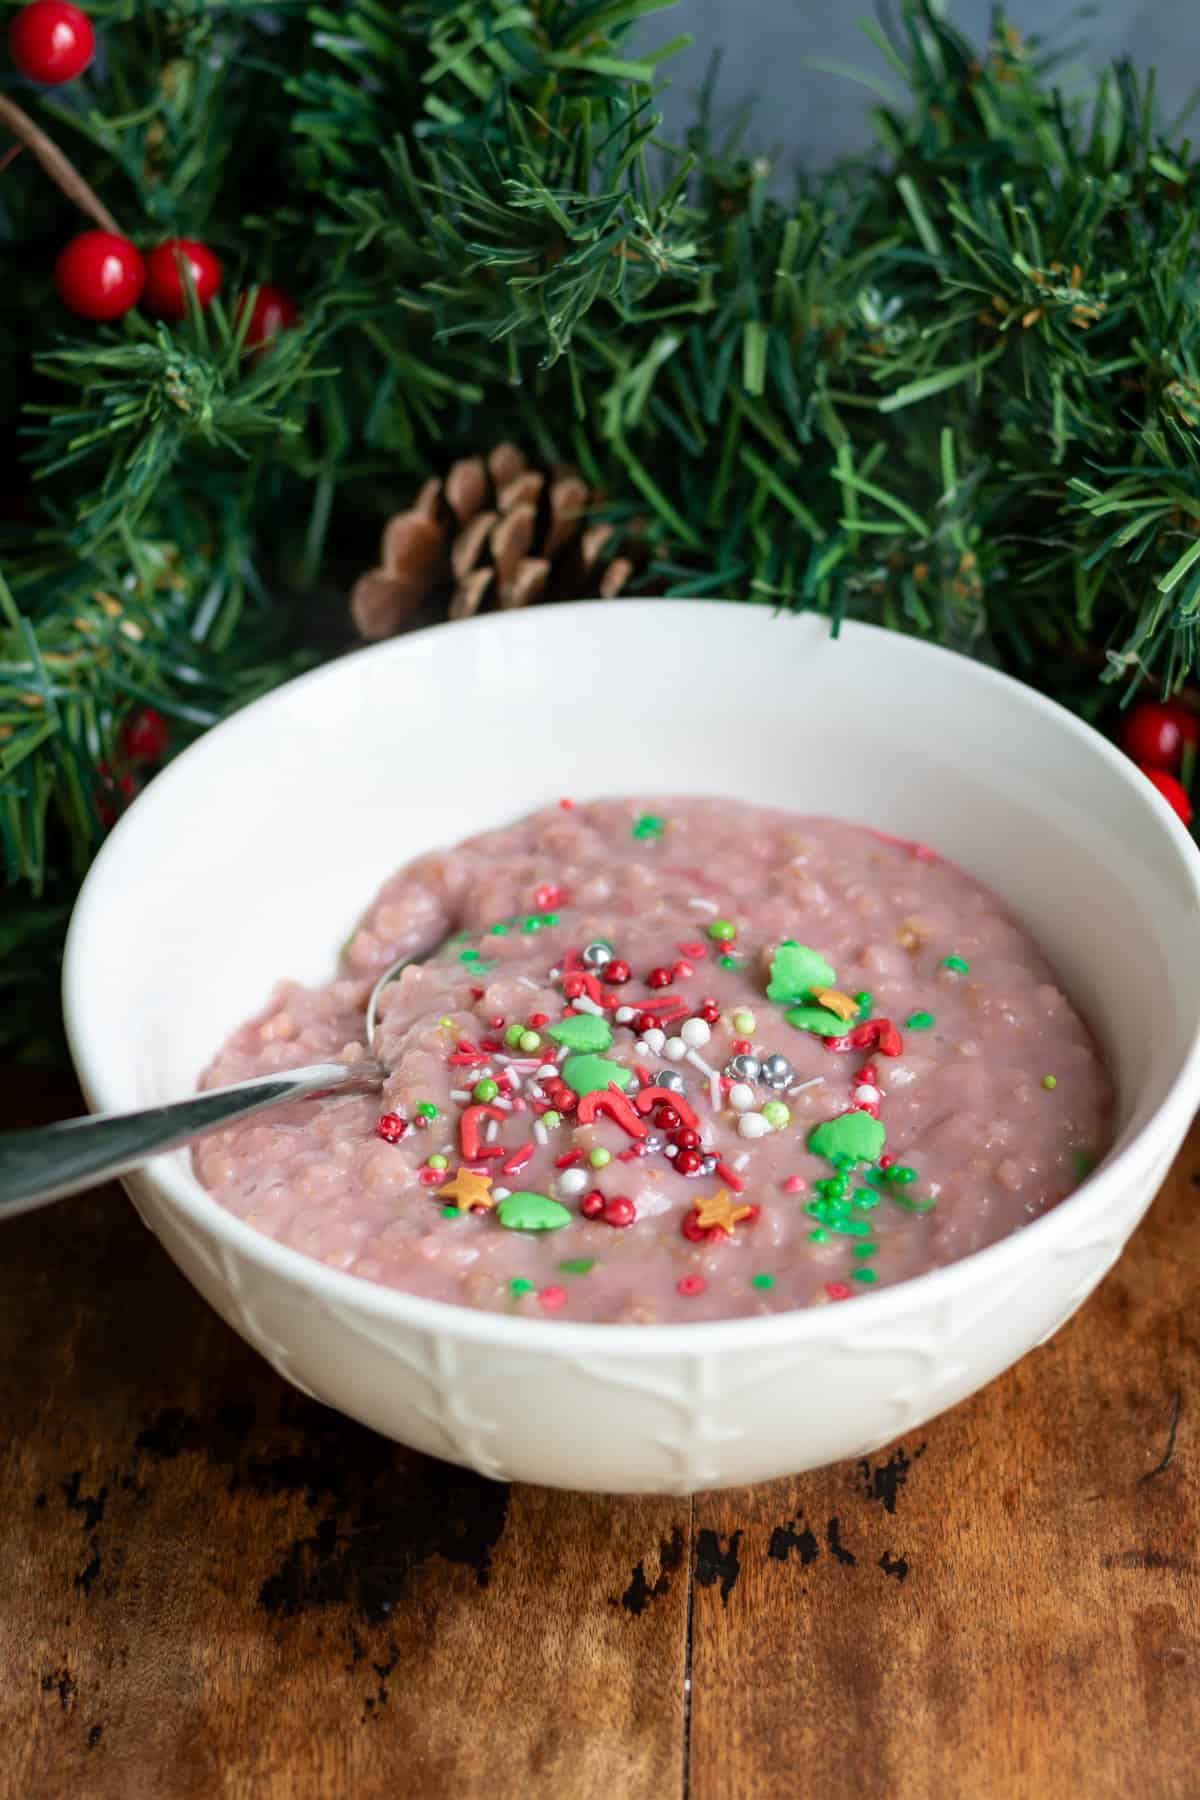 Bowl of oatmeal made from reindeer food.